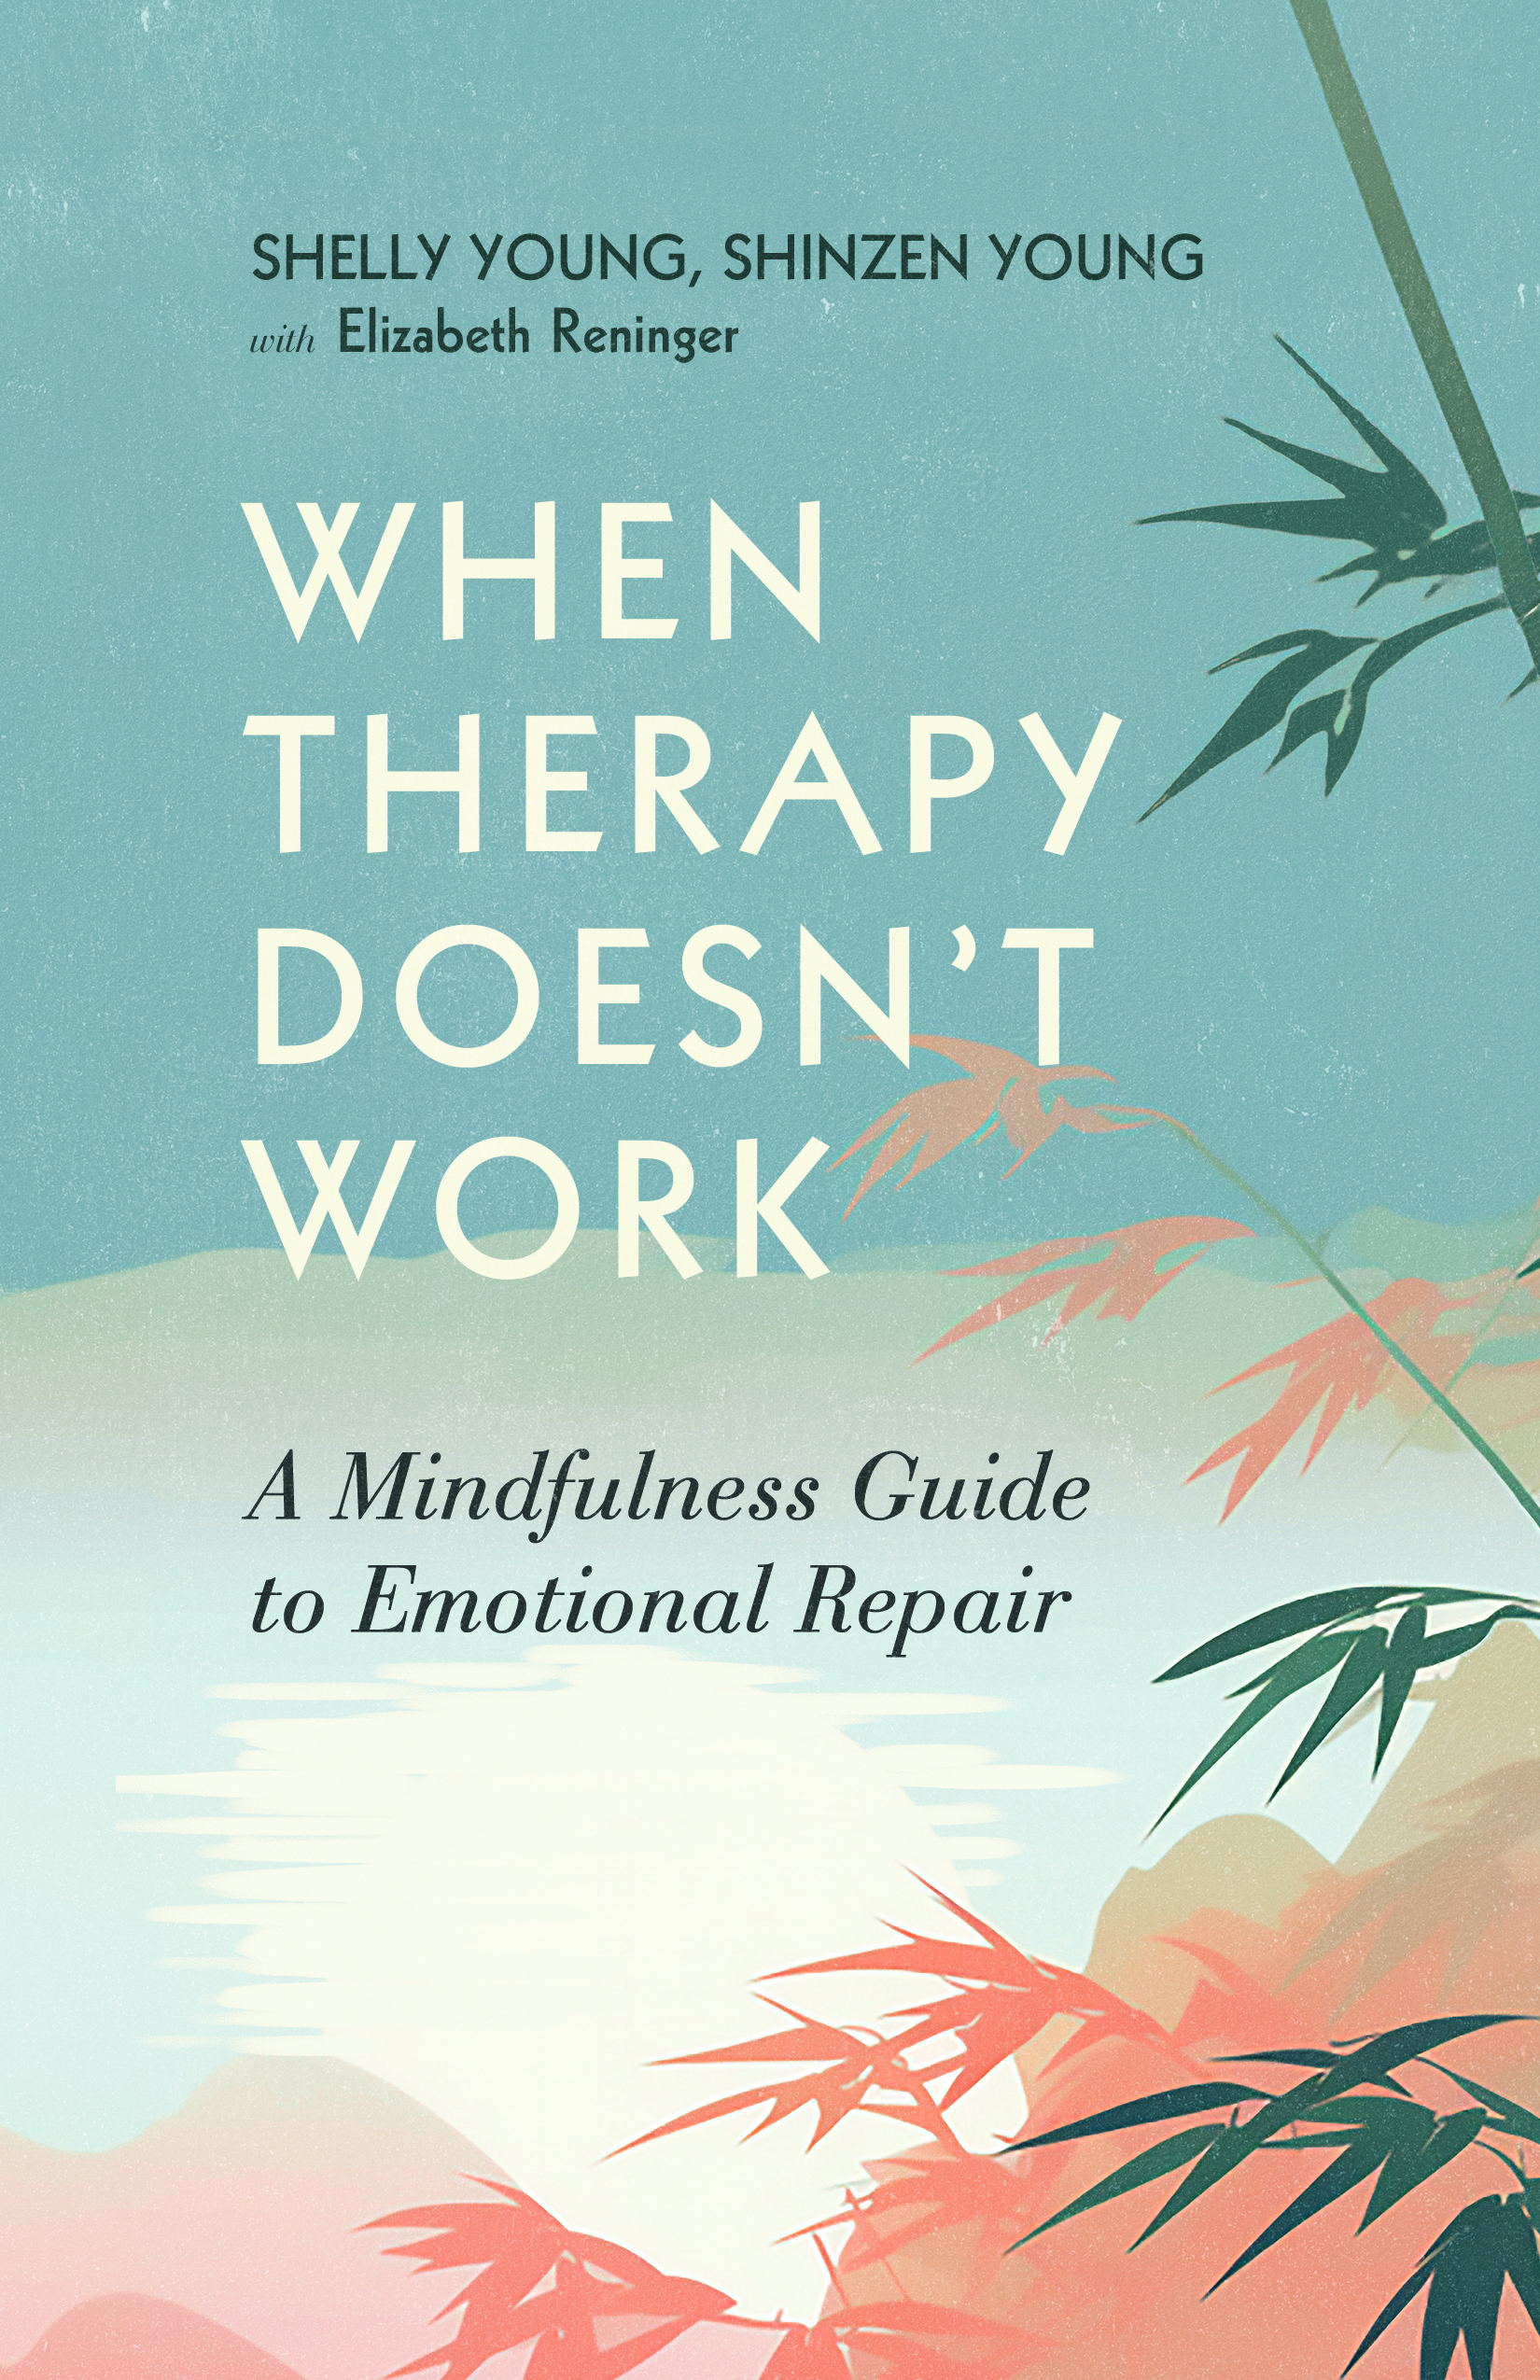 When Therapy Doesn’t Work: A Mindfulness Guide to Emotional
Repair